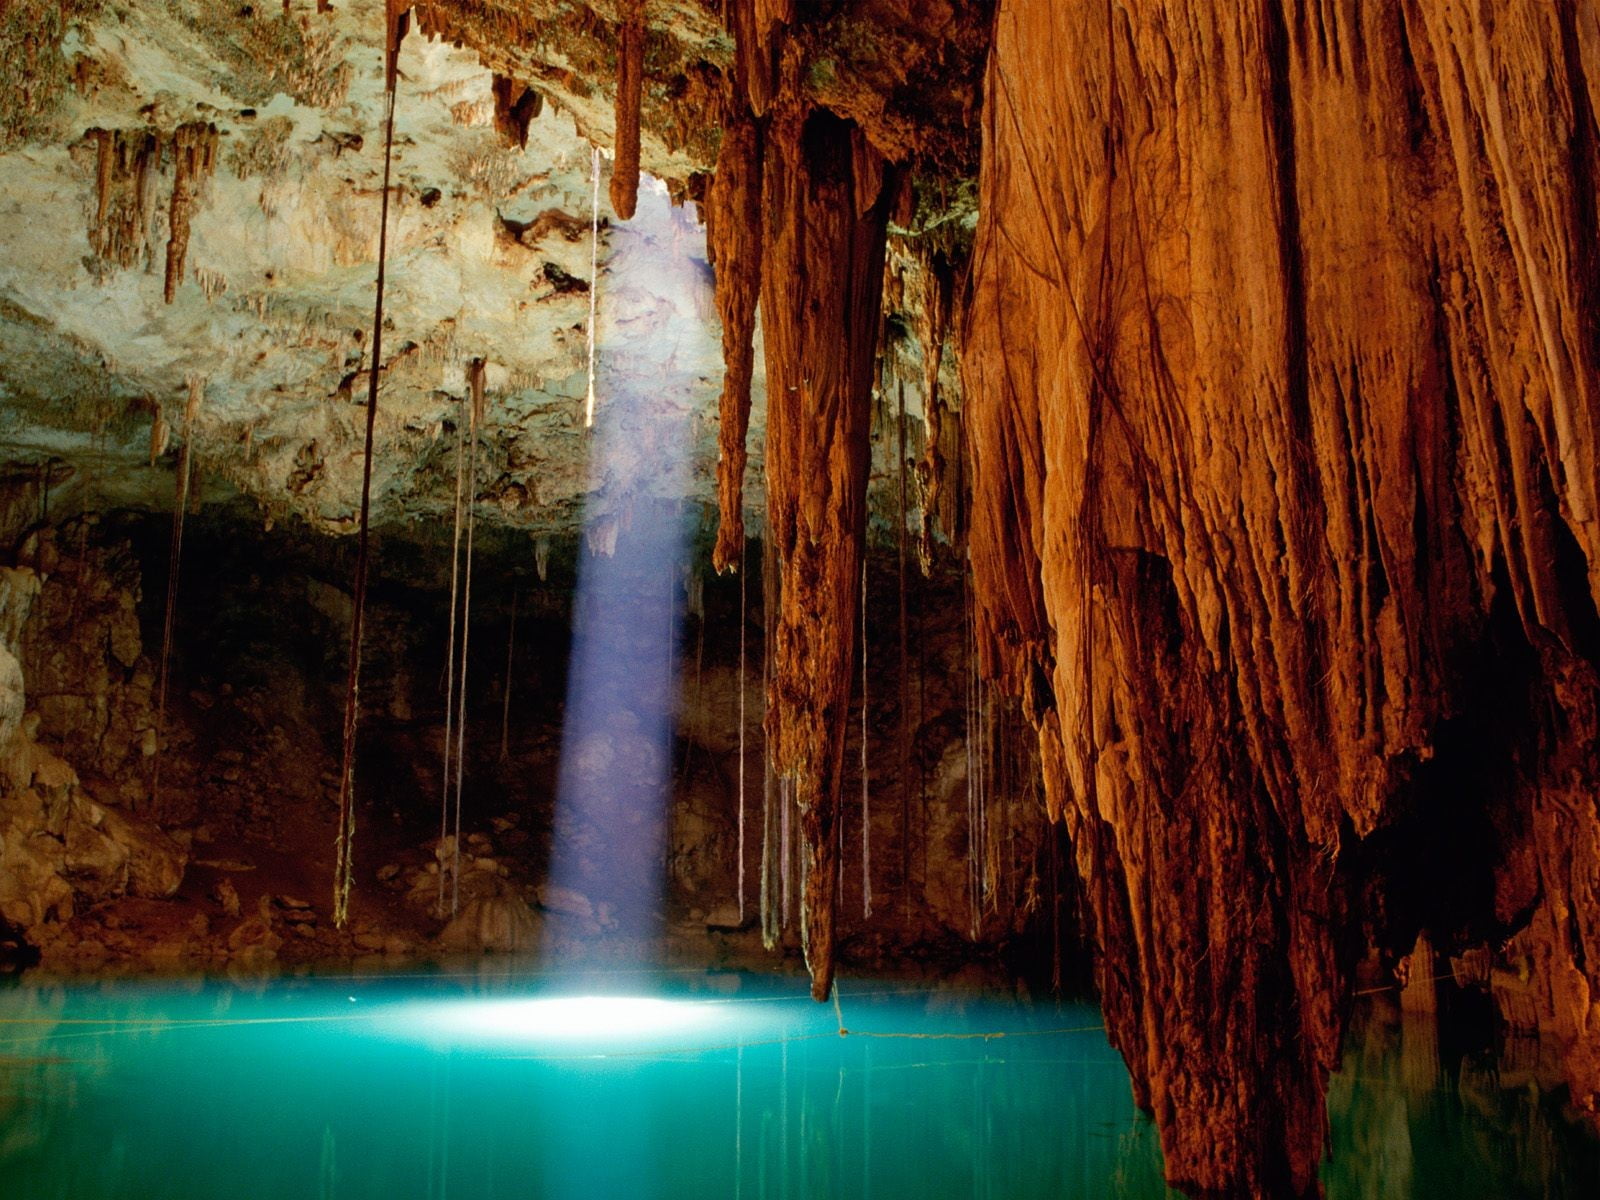 cave with water, nature, stalactites, lake, sunlight, no people